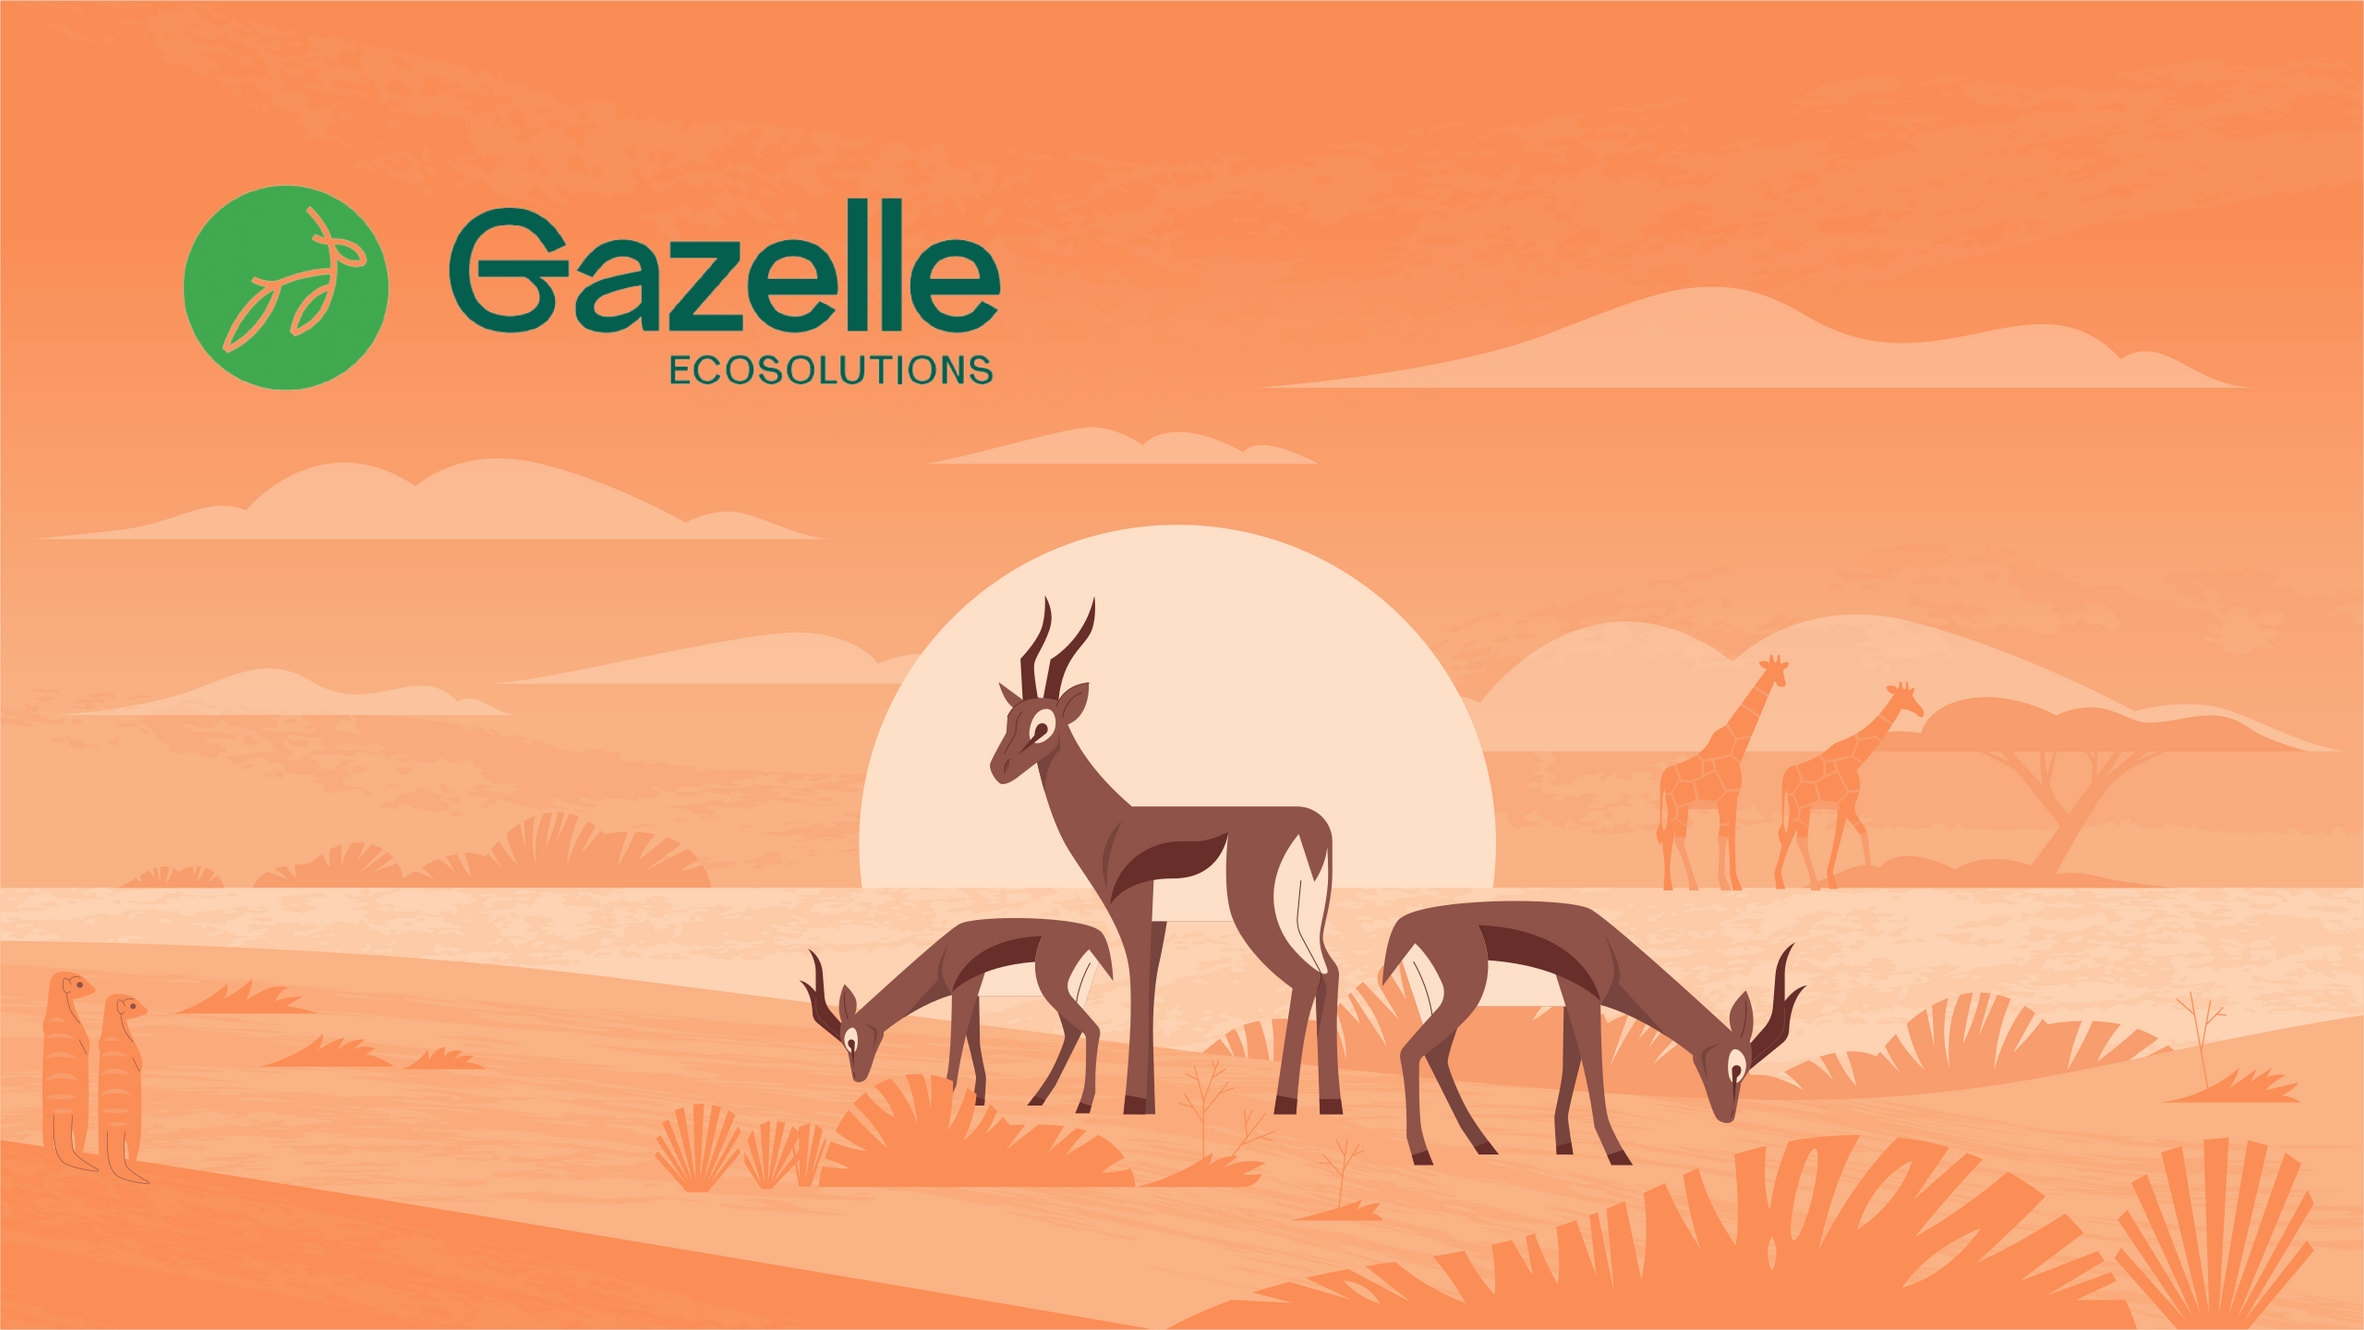 Gazelle Ecosolutions Unveils New Branding in Partnership With Cubic Orange